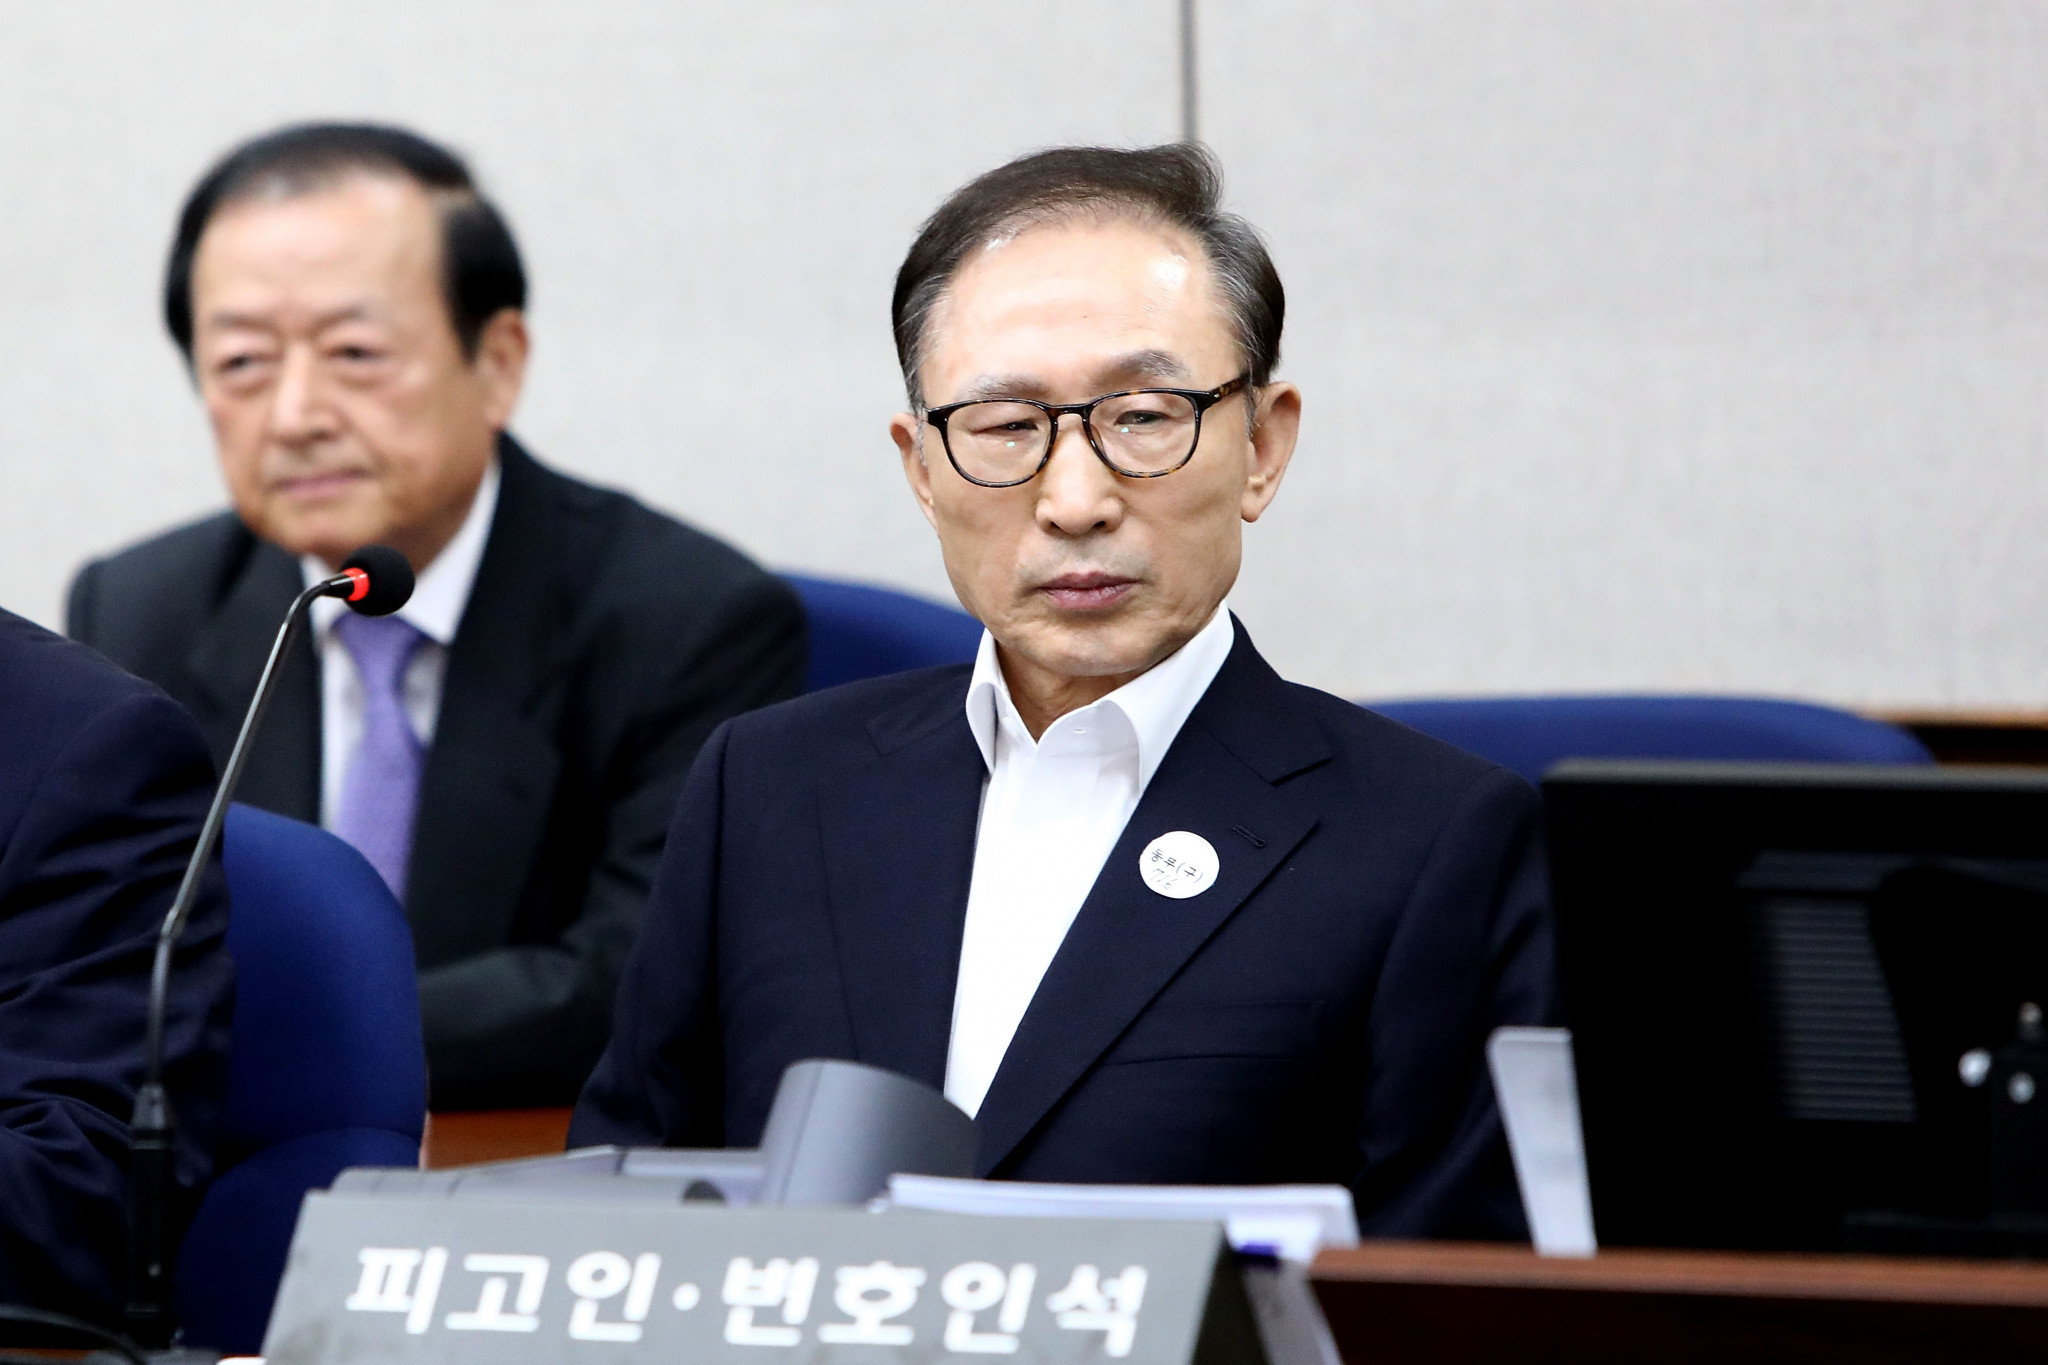 Special pardons were given to former South Korean President Lee Myung-bak ©Getty Images